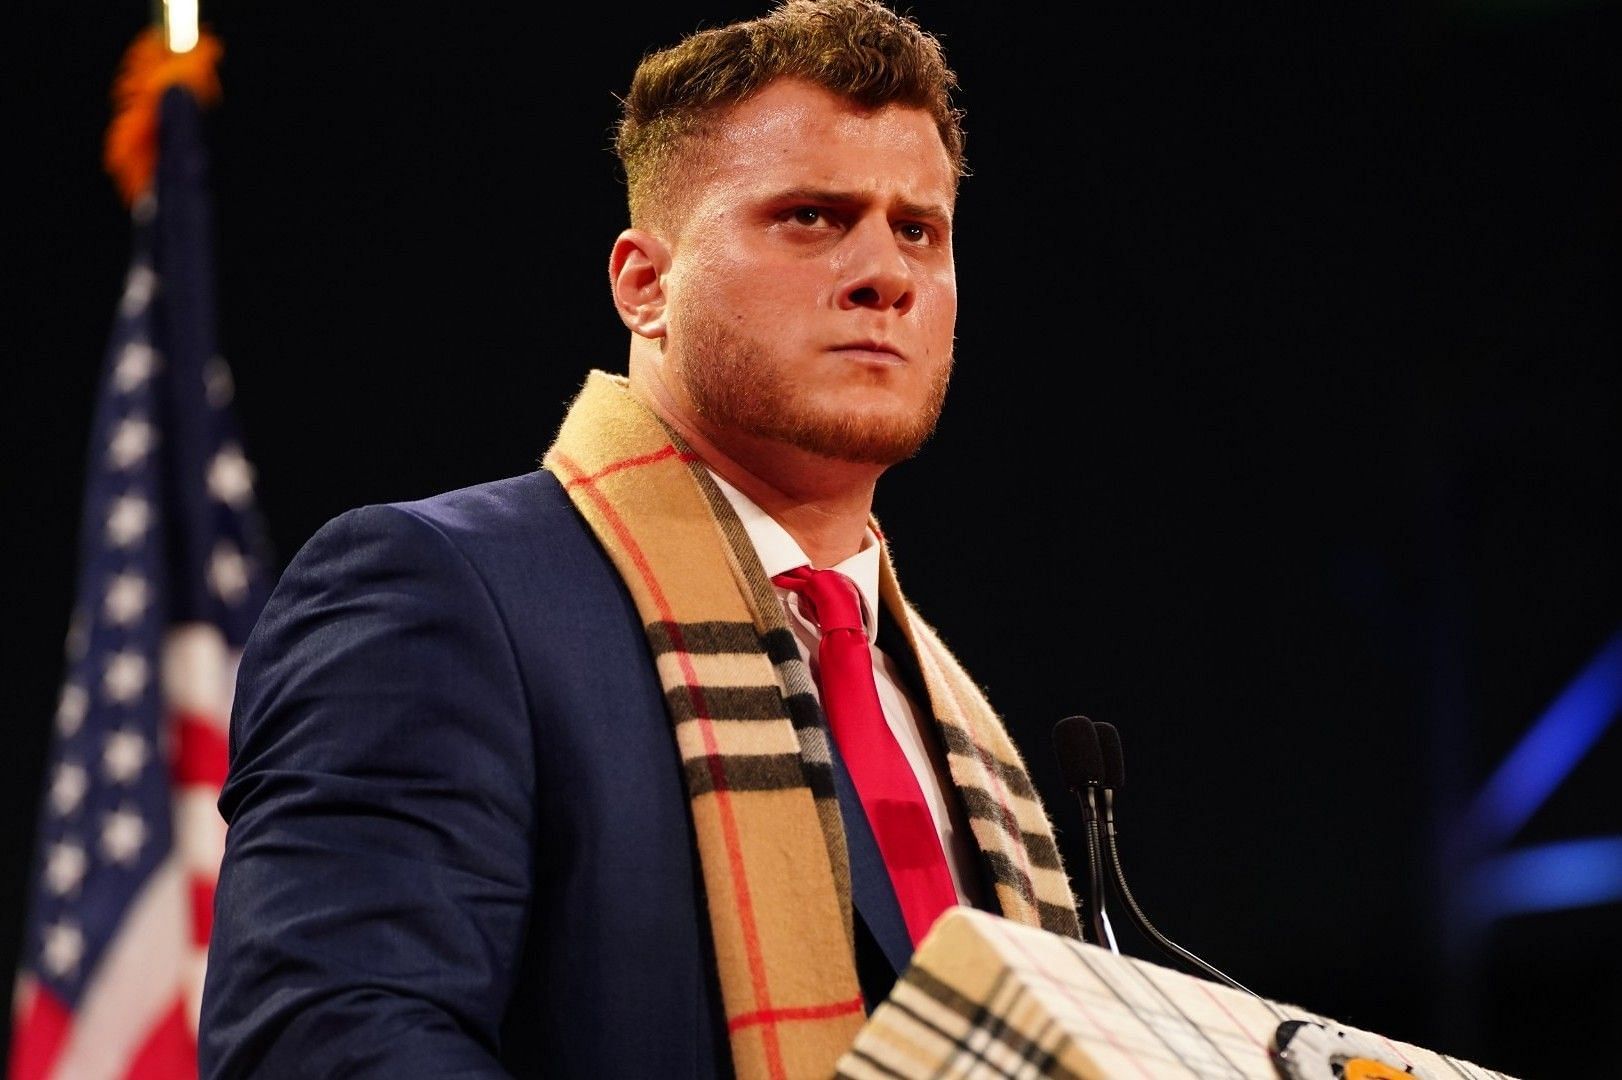 MJF will face Dante Martin this week on Dynamite